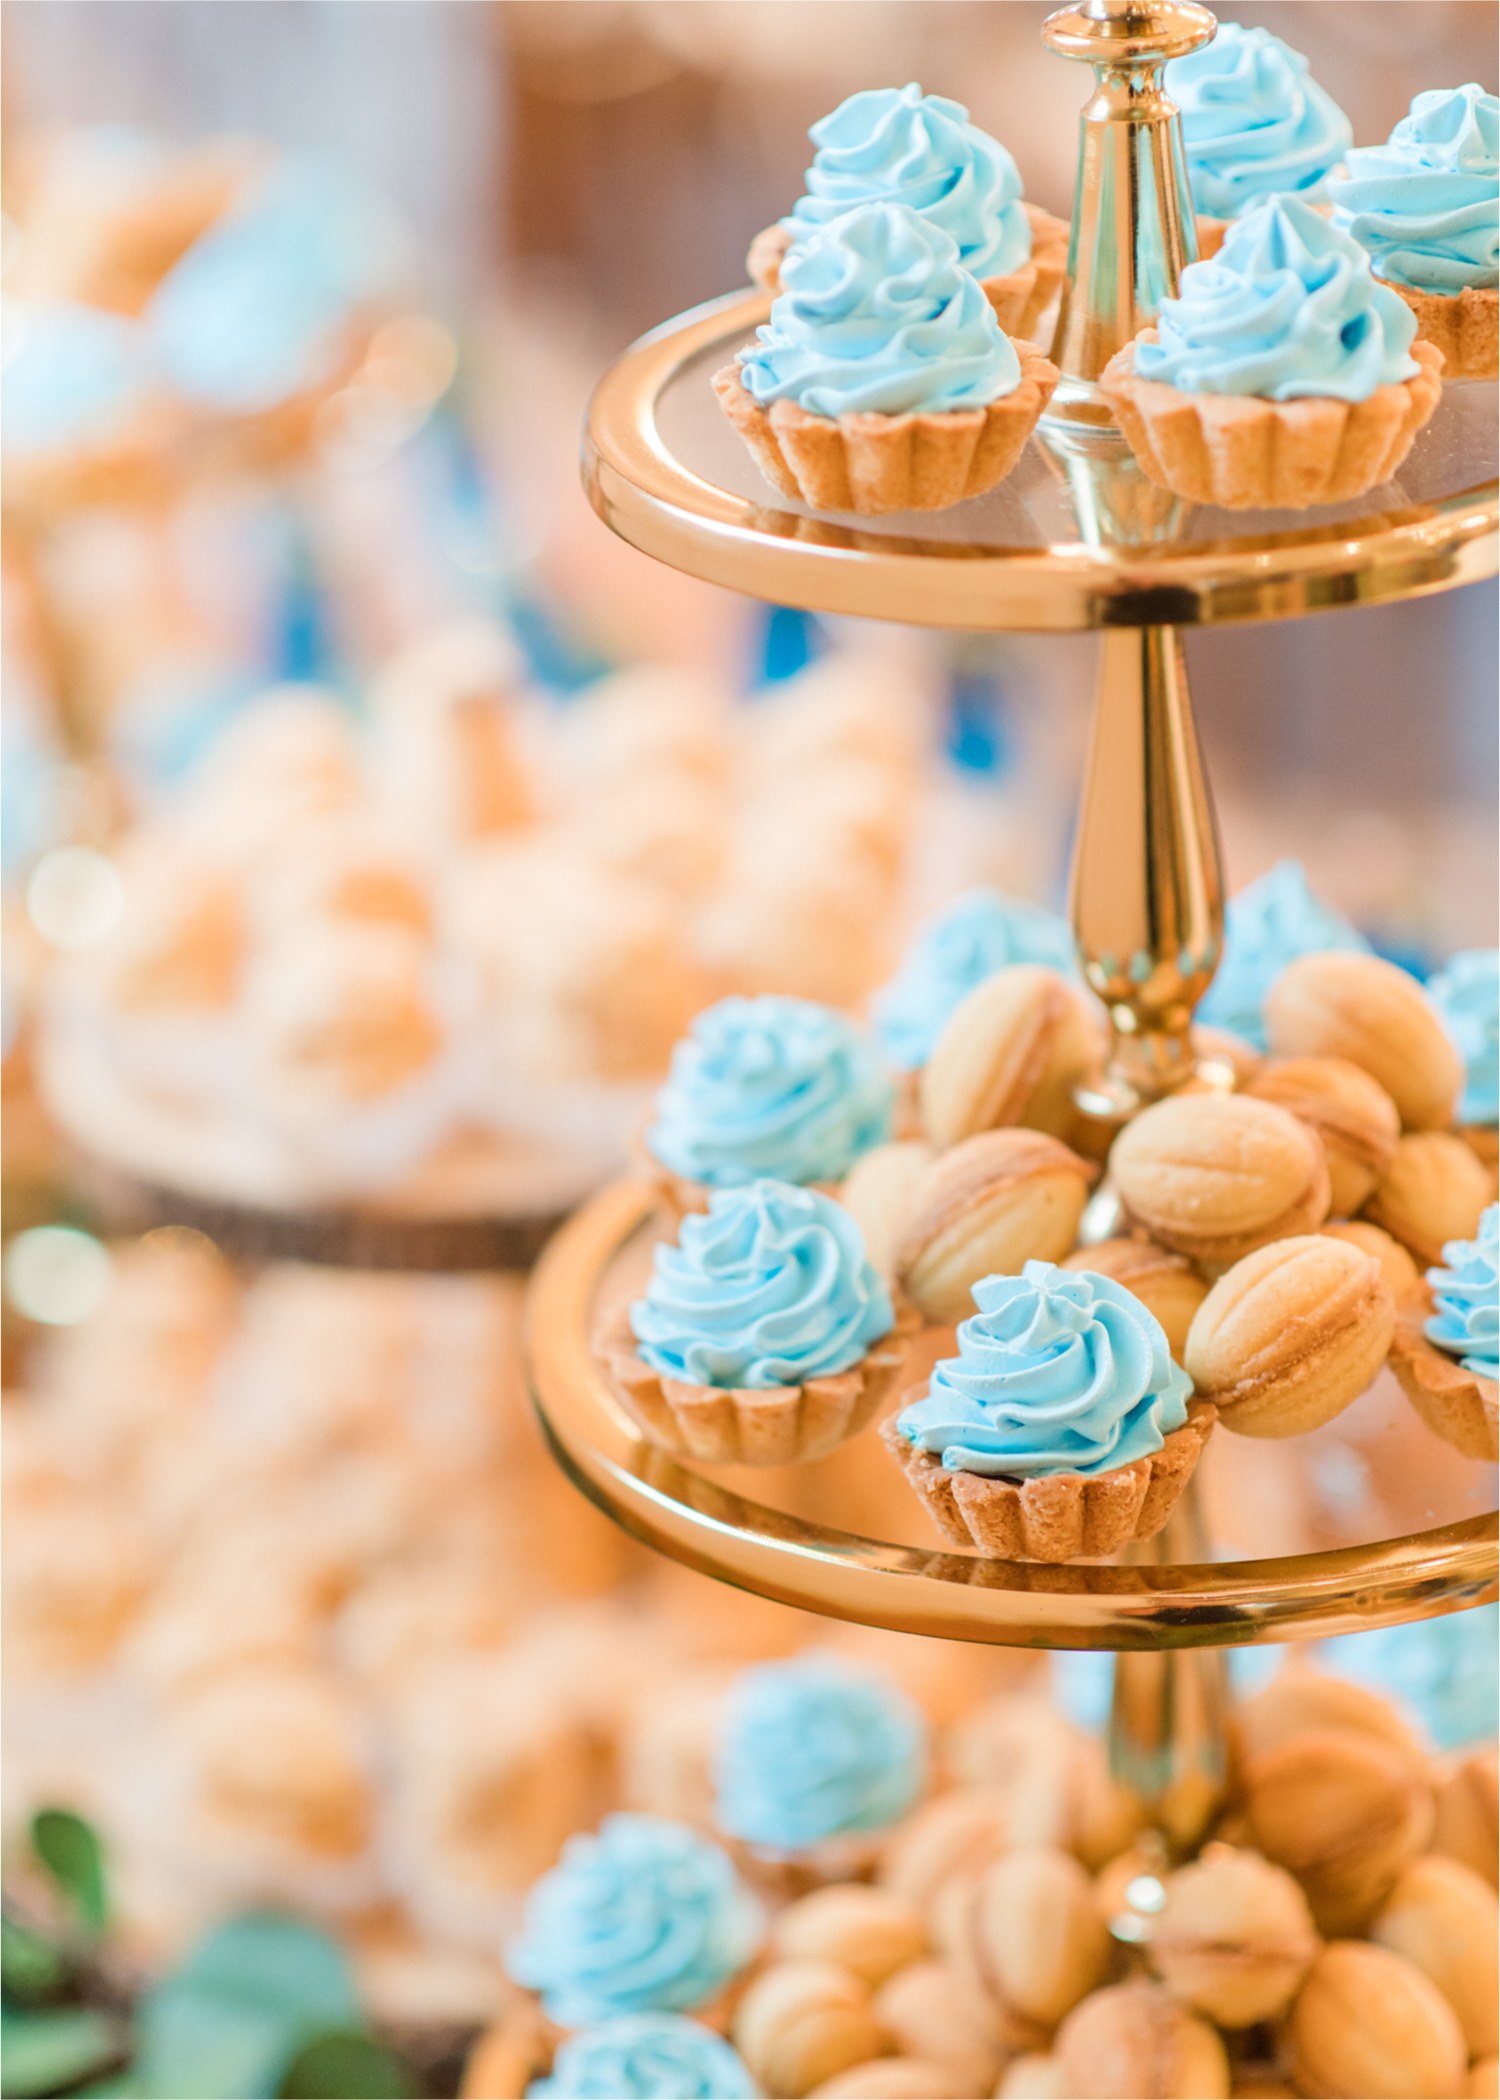 Romantic and Rustic Wedding at The Mill in Windsor | Britni Girard Photography | Colorado based wedding photography and videography team | Yummy Russian Treats and dessert table